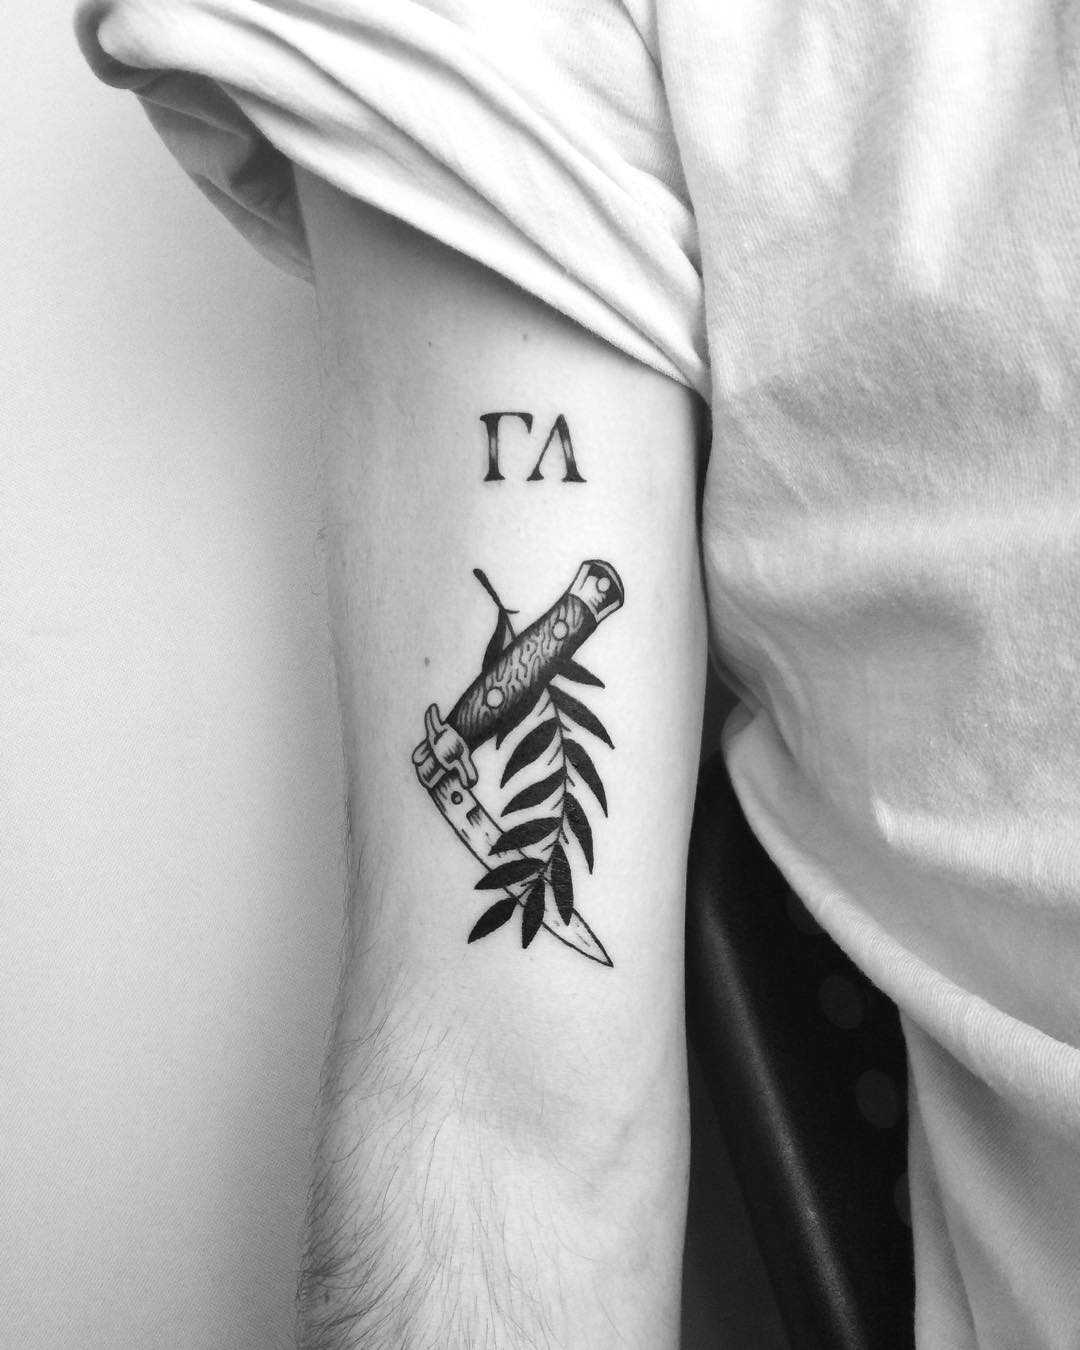 Pocket knife and branch tattoo